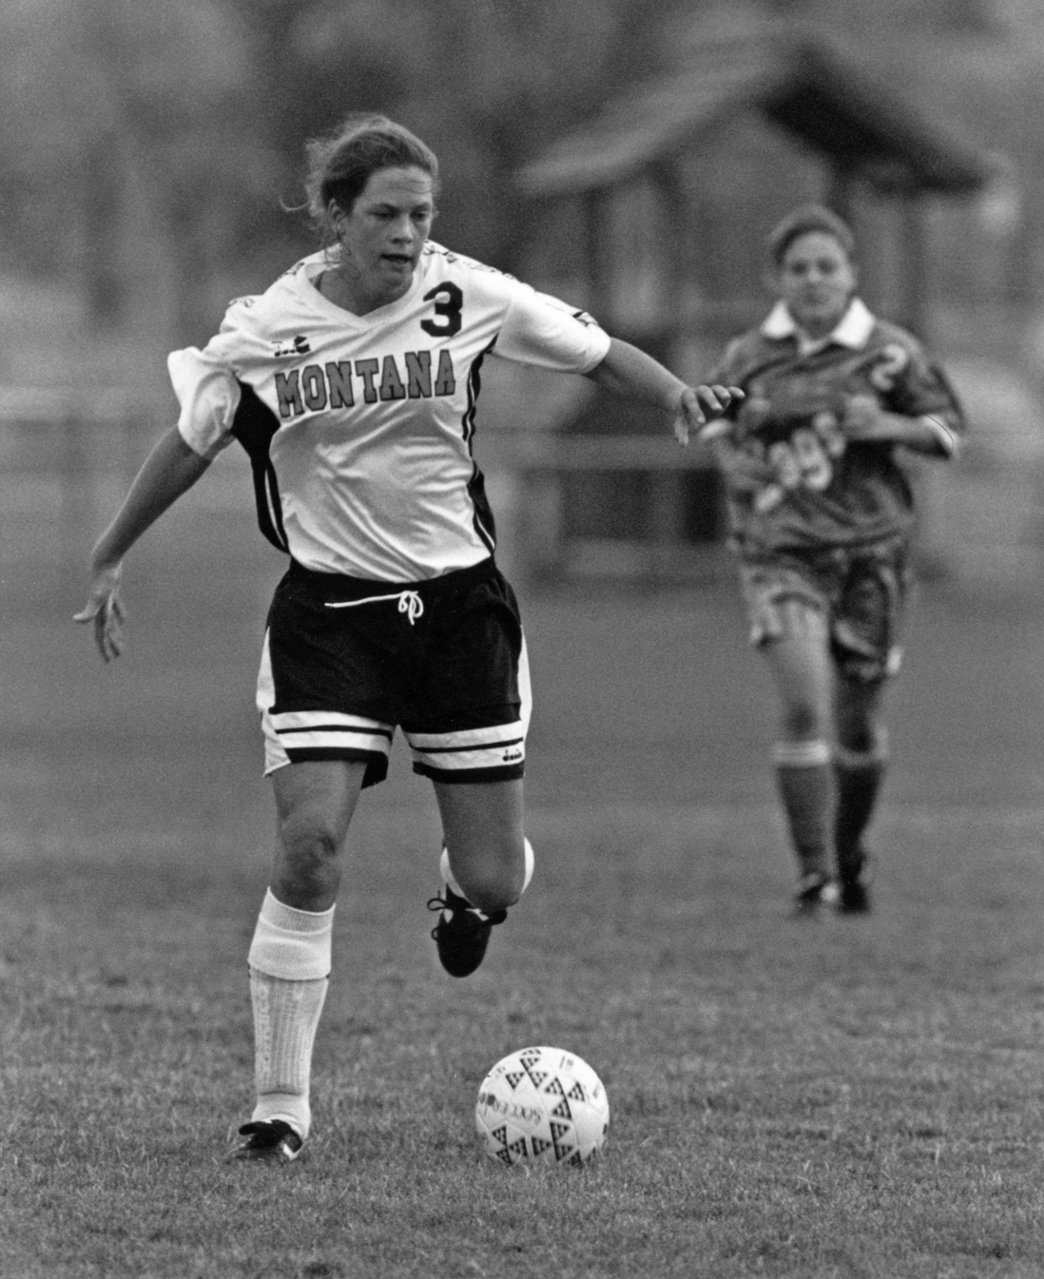 Carey played soccer for UM in the 1990s. (Photo courtesy of UM Athletics)